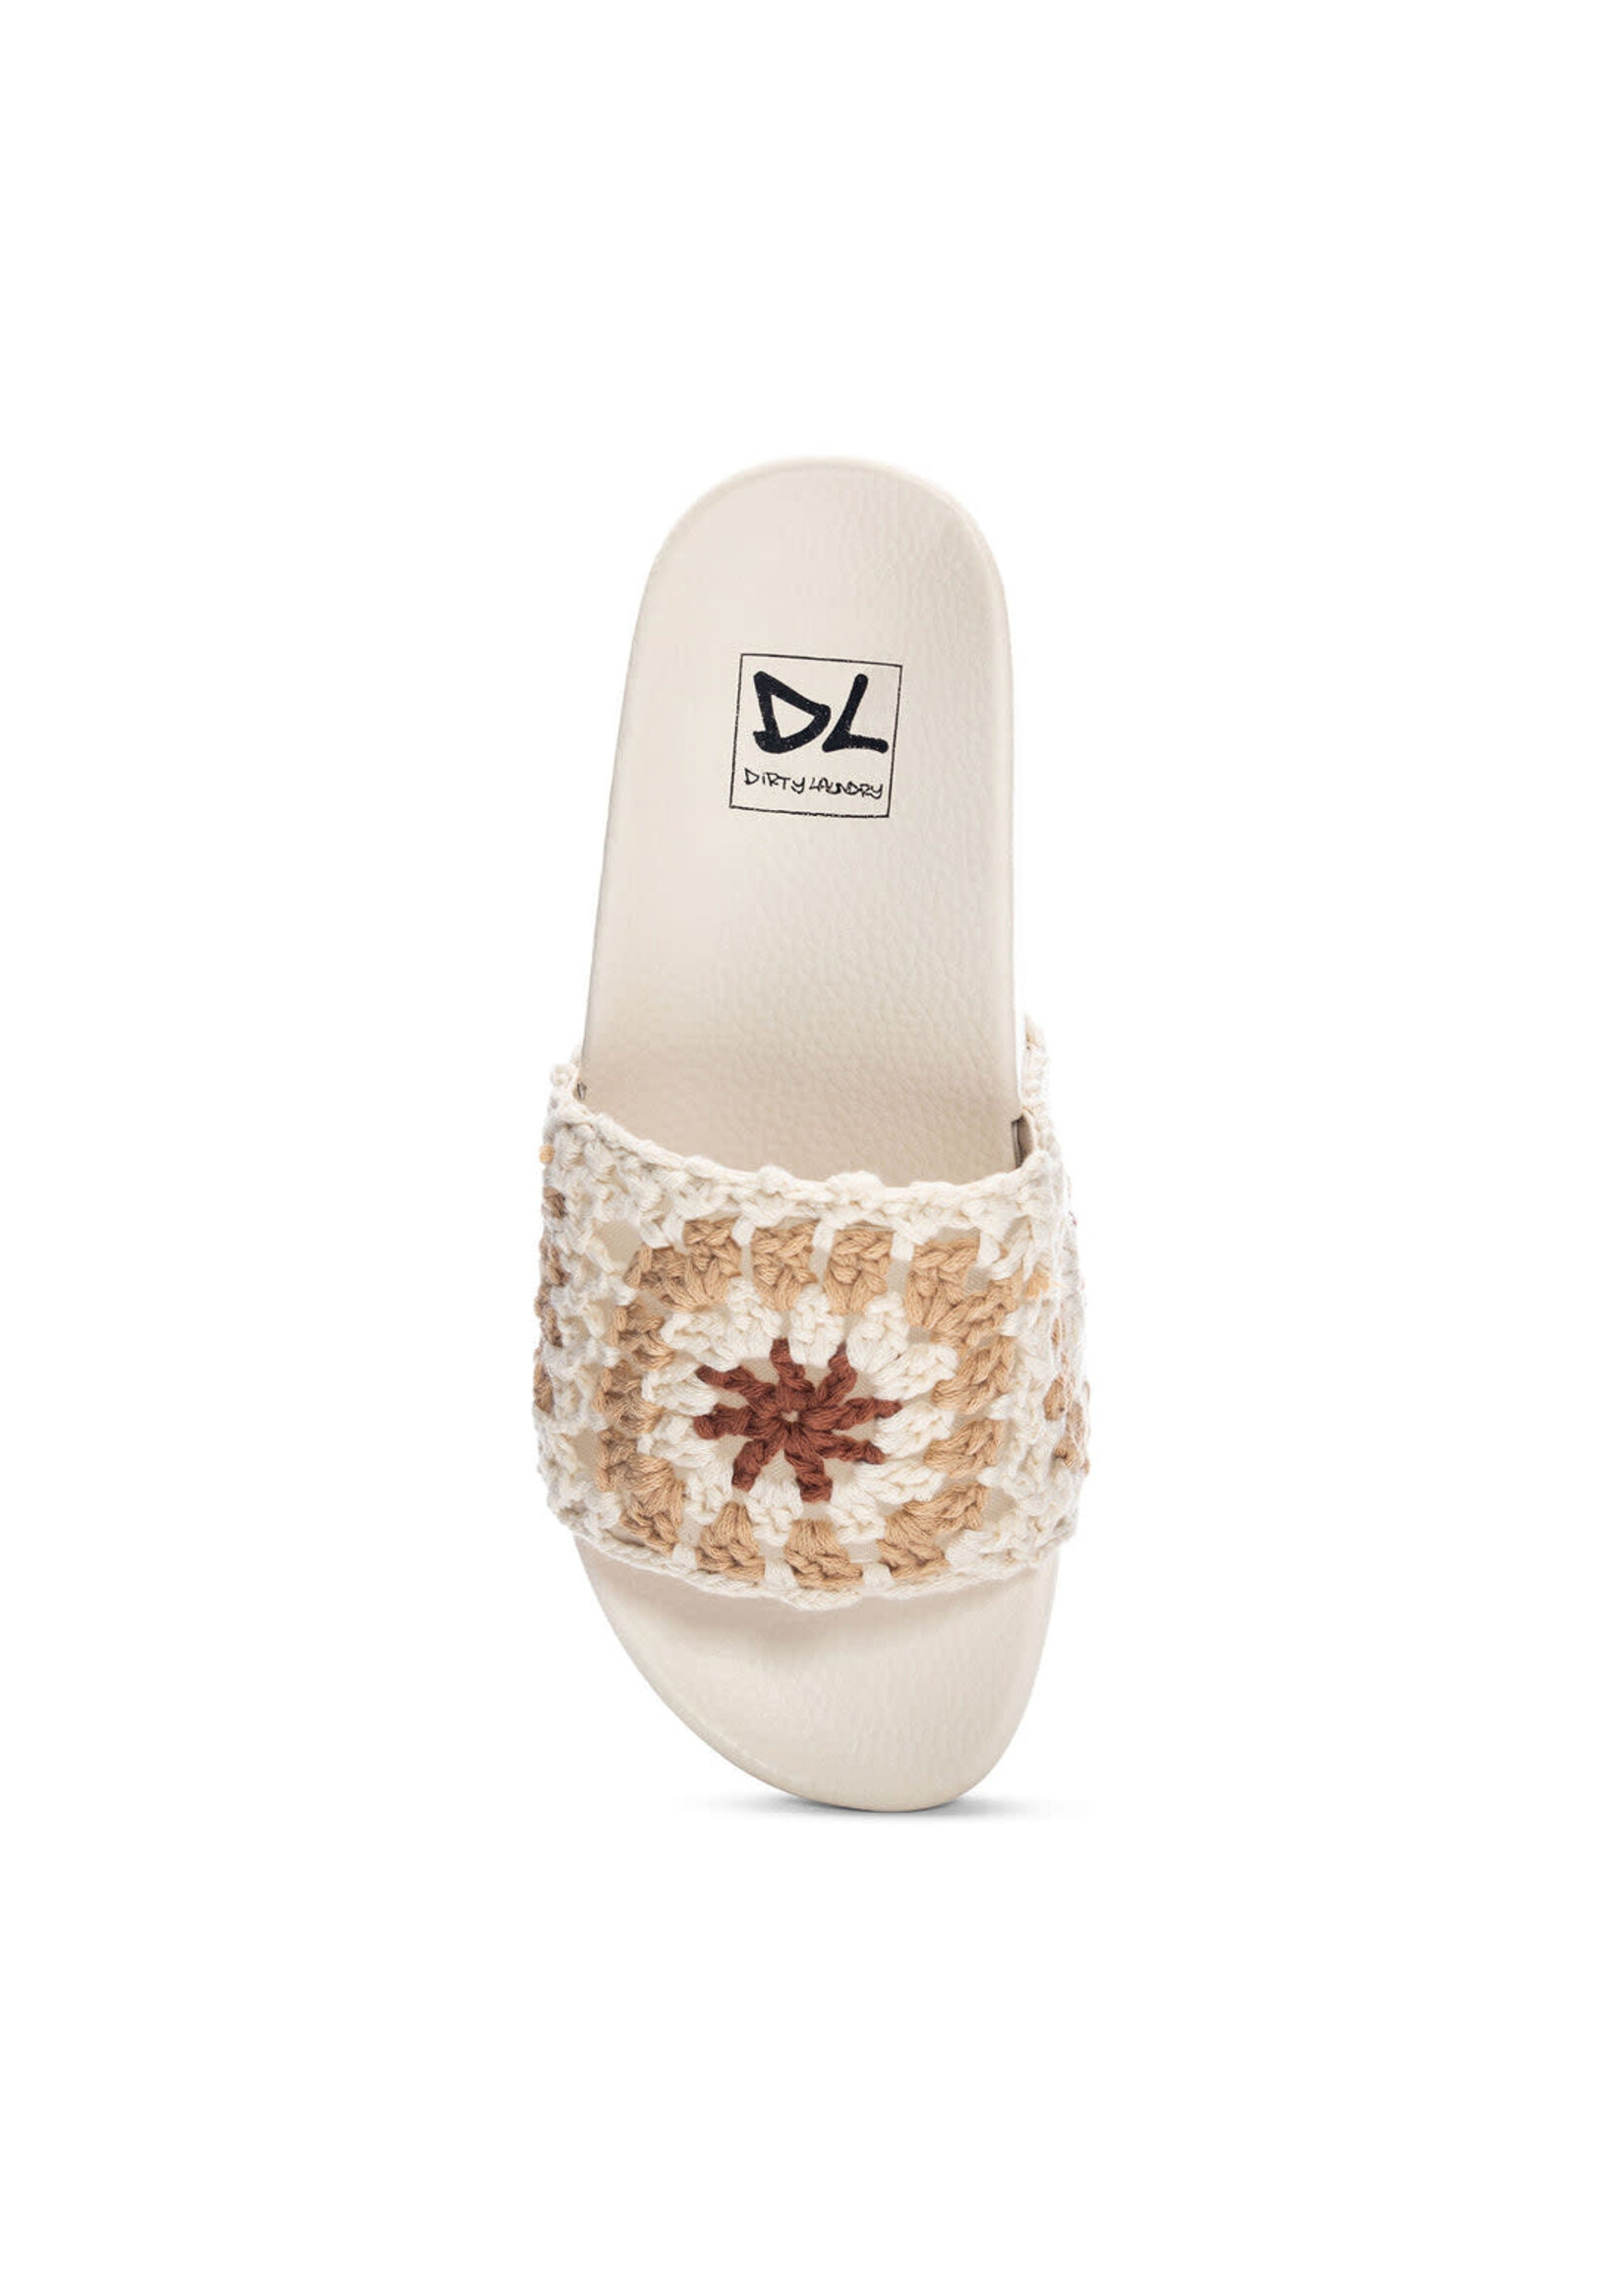 Dirty Laundry Worble Crochet Slide in Cream by Dirty Laundry